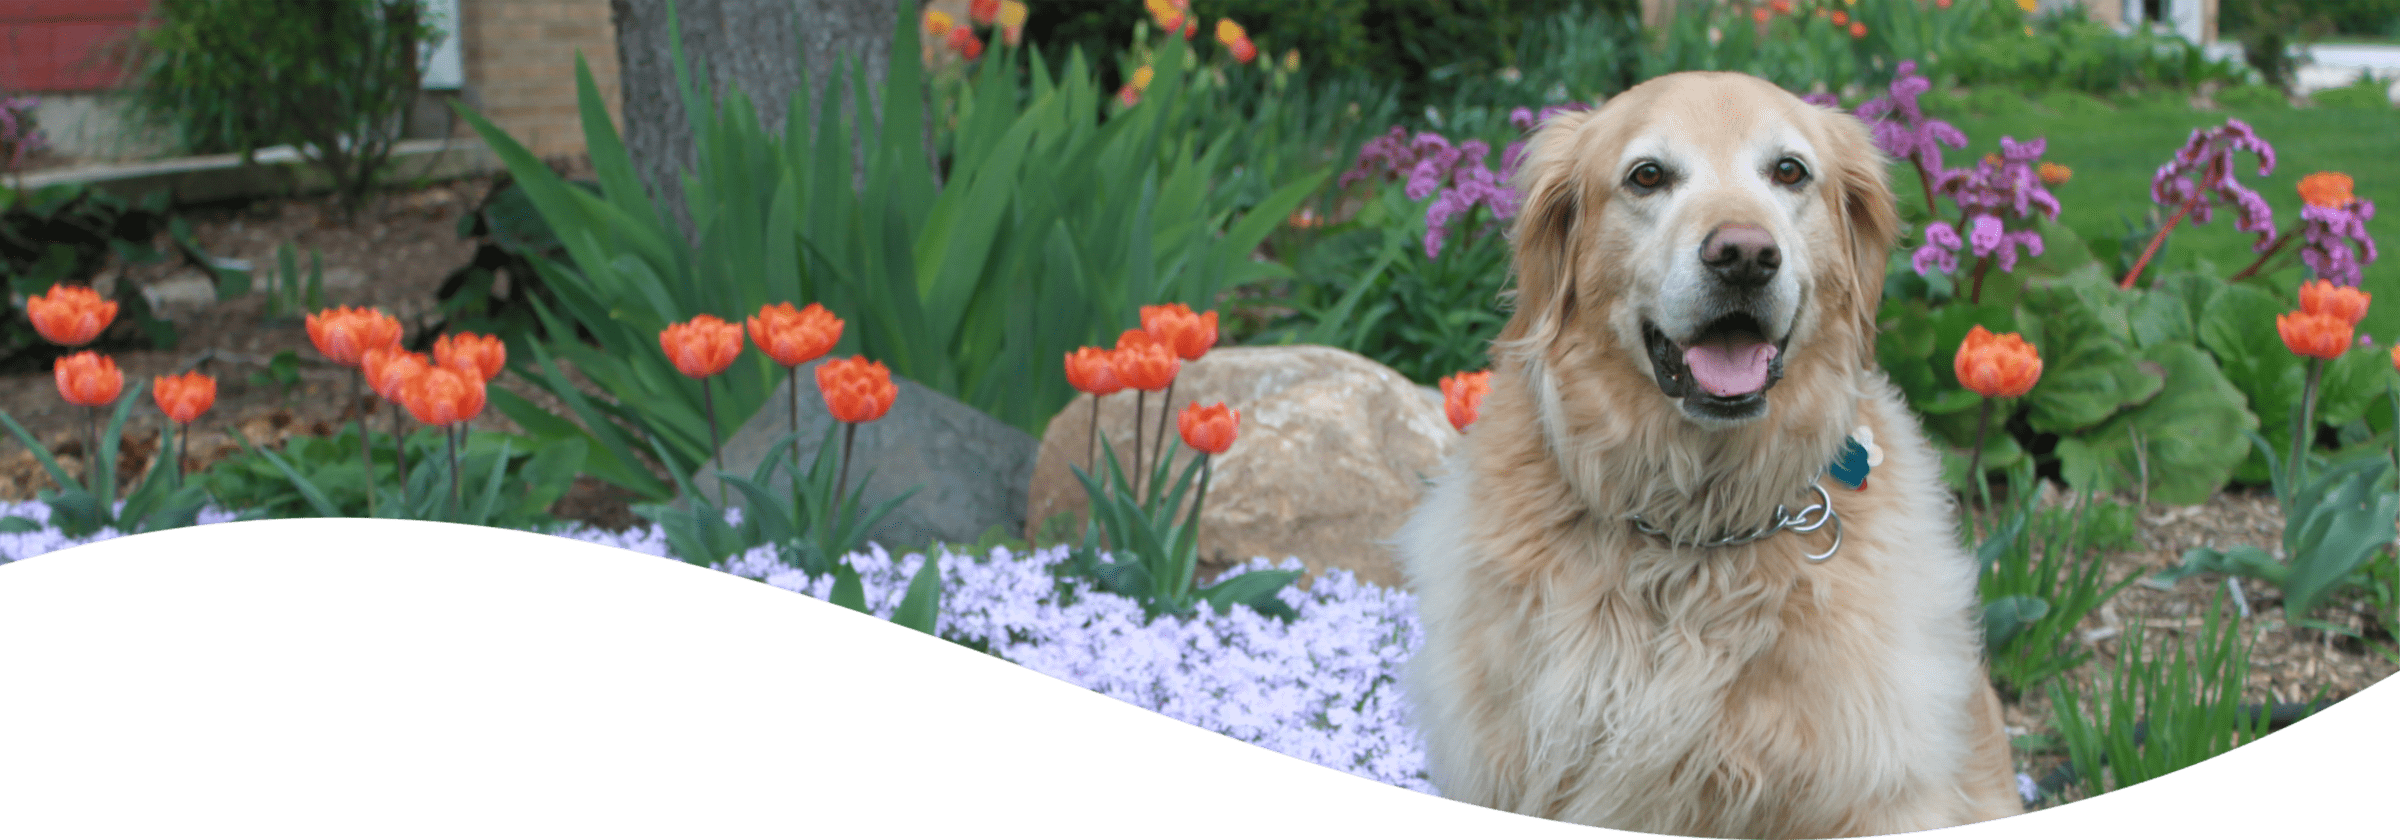 A happy golden retriever sits among vibrant flowers in a lush garden, its tongue out, embodying the joy of a sunny day outdoors.